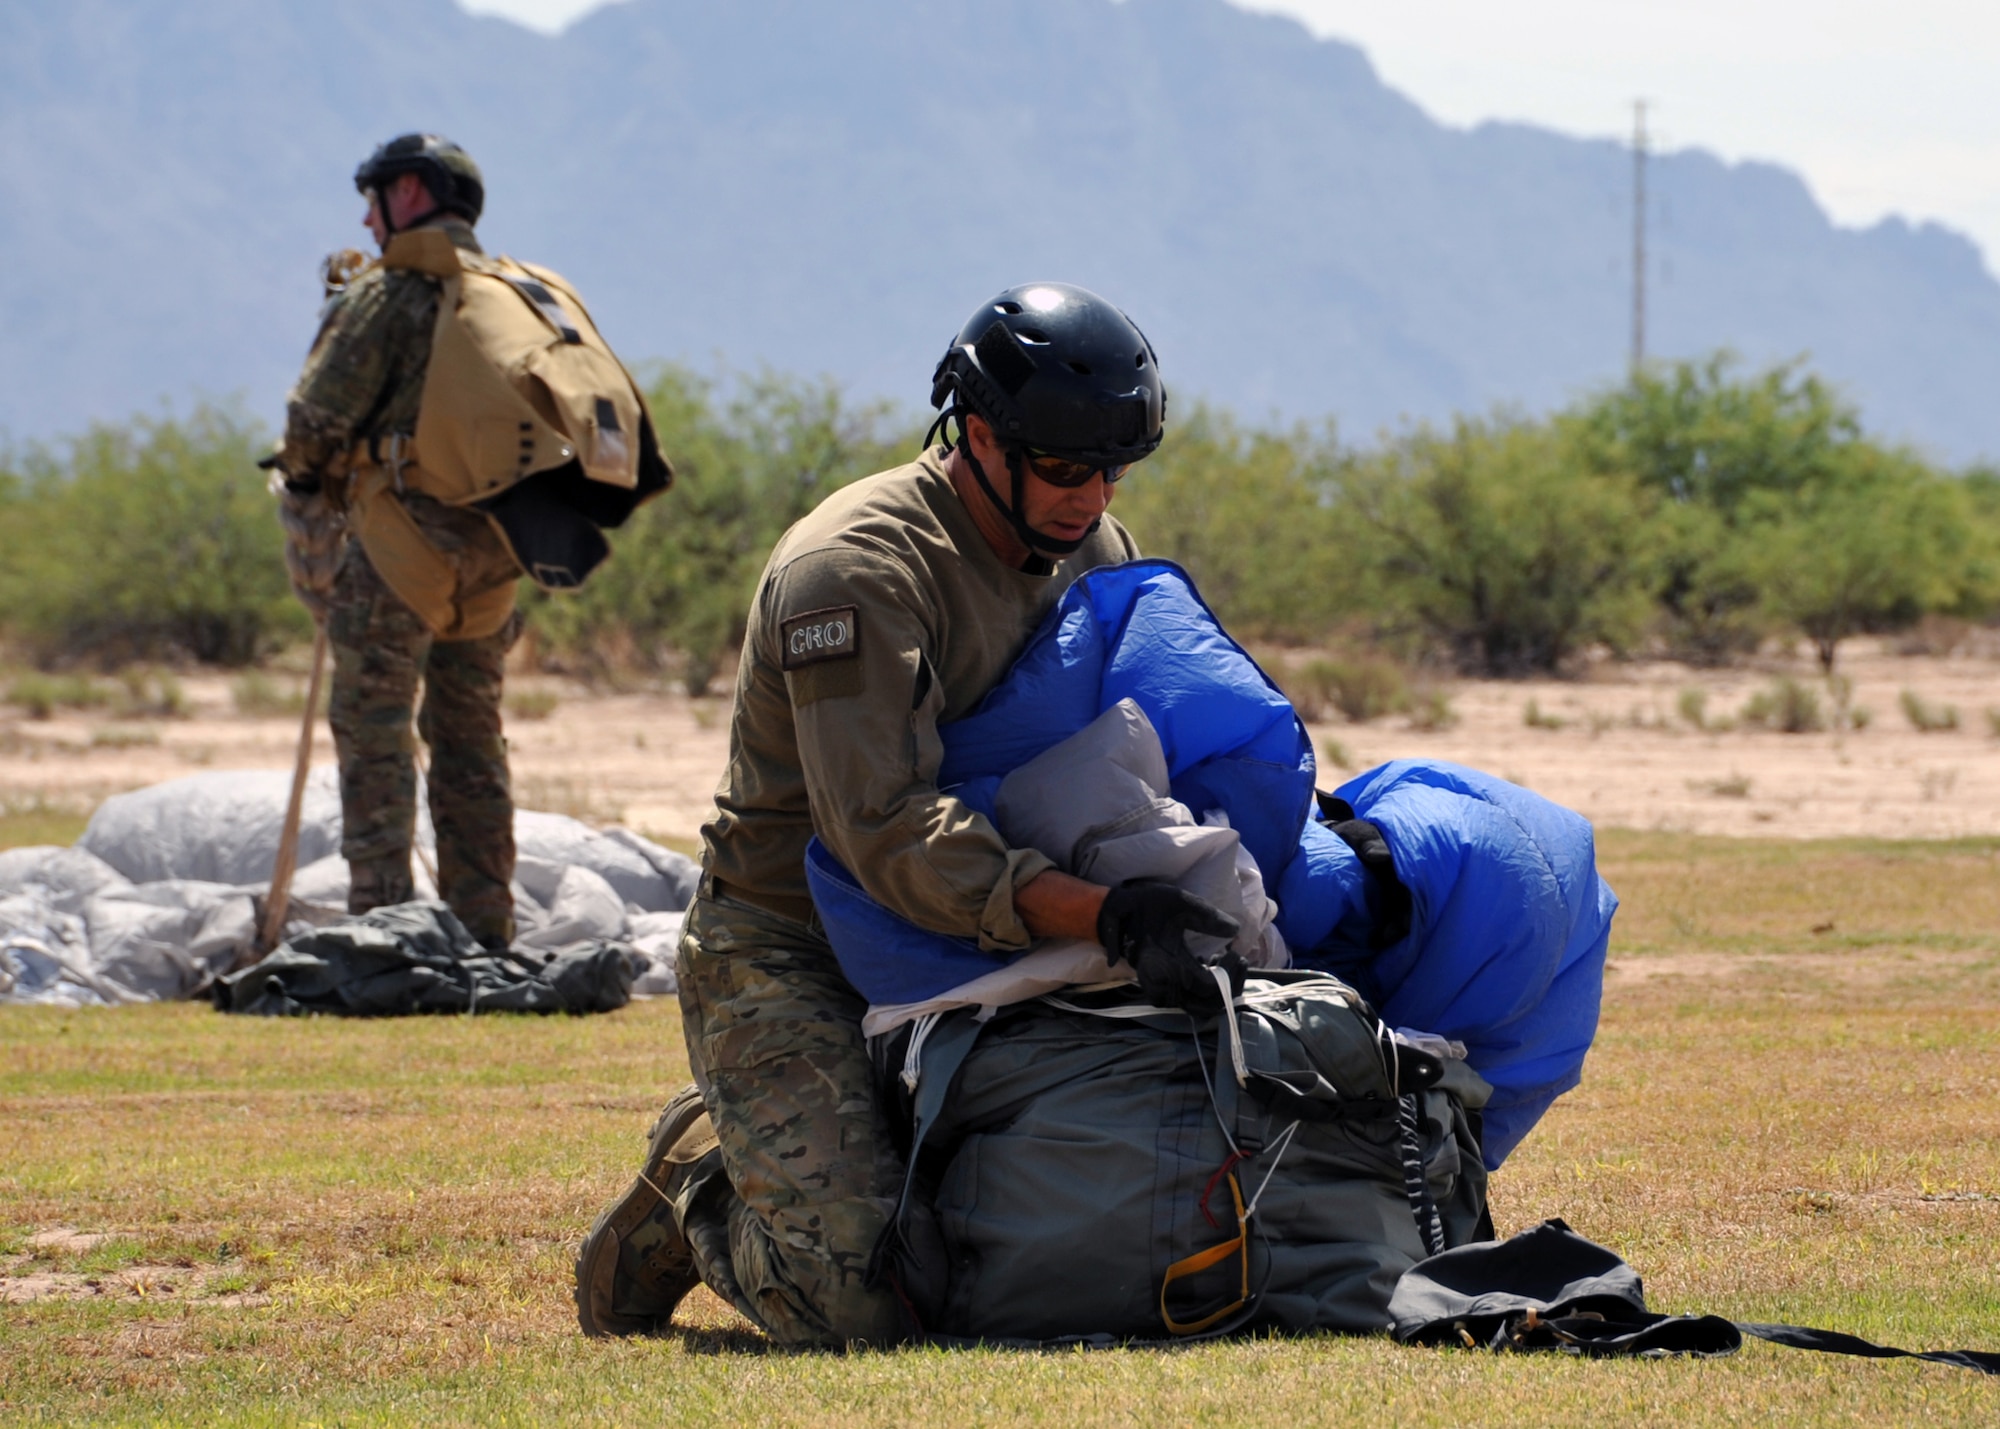 U.S. Air Force Reservists assigned to the 306th Rescue Squadron practice skydiving in Eloy, Ariz., May 14. The 306th RQS is assigned to the 943rd Rescue Group at Davis-Monthan Air Force Base, Ariz. Air Force pararescuemen, also known as PJs, are the only Department of Defense elite combat forces specifically organized, trained, equipped and postured to conduct full-spectrum personnel recovery to include both conventional and unconventional combat rescue operations. These battlefield Airmen are the most highly-trained, versatile personnel recovery specialists in the world. Pararescue is the nation's force of choice to execute the most perilous, demanding and extreme rescue missions anytime, anywhere across the globe. (U.S. Air Force photo by Tech. Sgt. Carolyn Herrick)